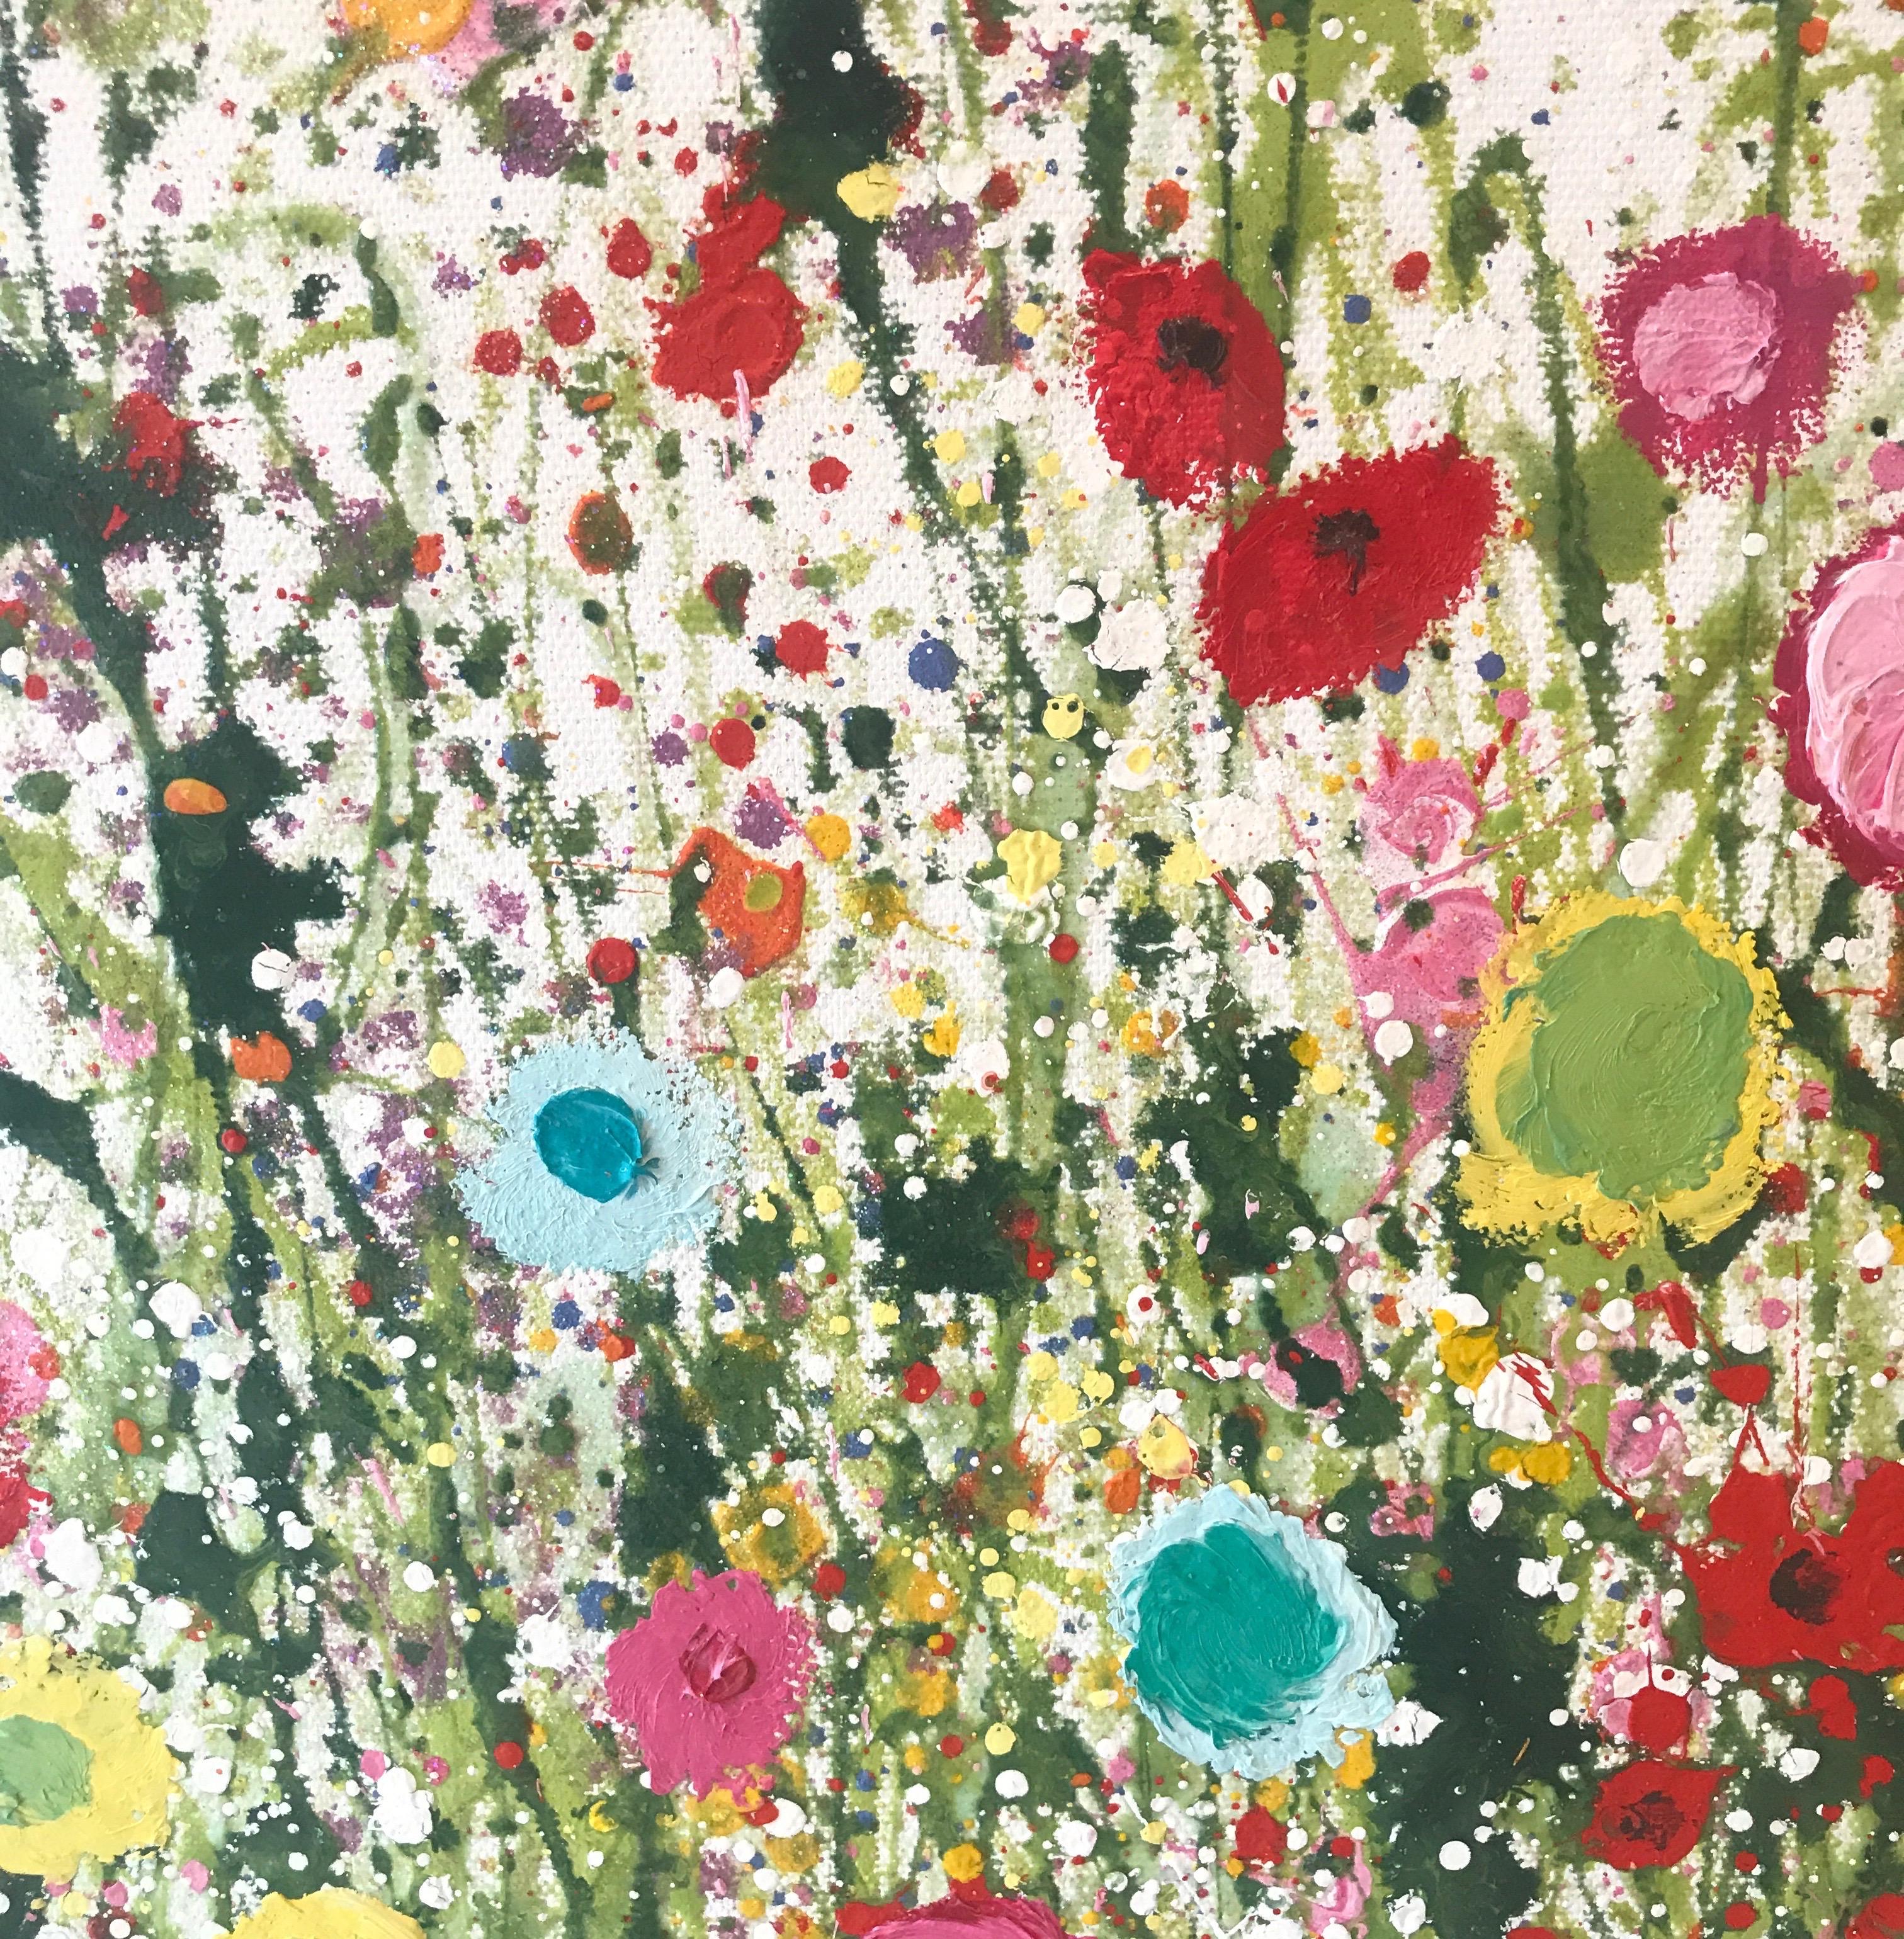 Your Sweet Love Is so Very Beautiful - Floral landscape oil painting 21st Centu - Painting by Yvonne Coomber